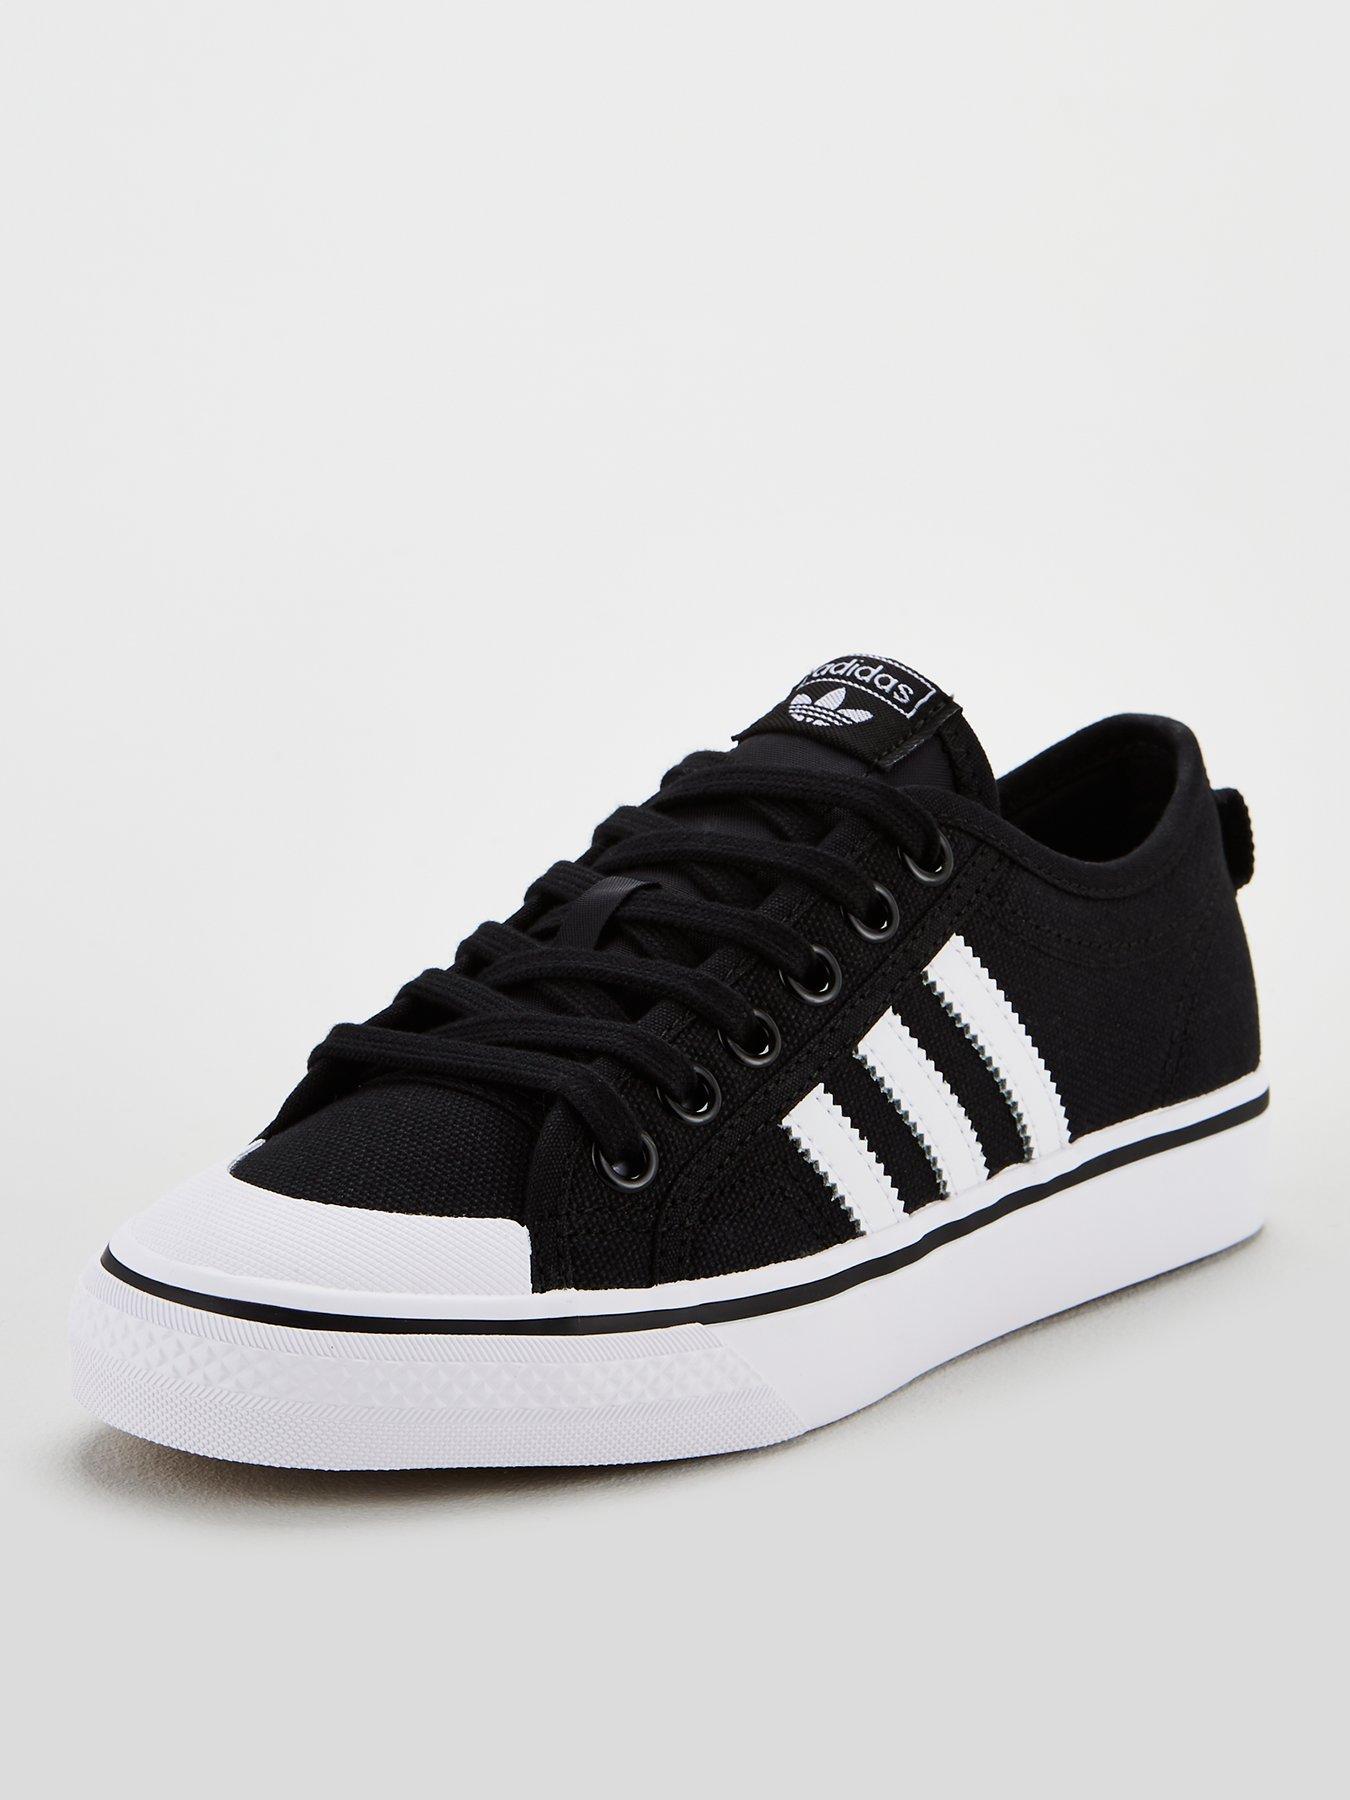 adidas classic trainers womens